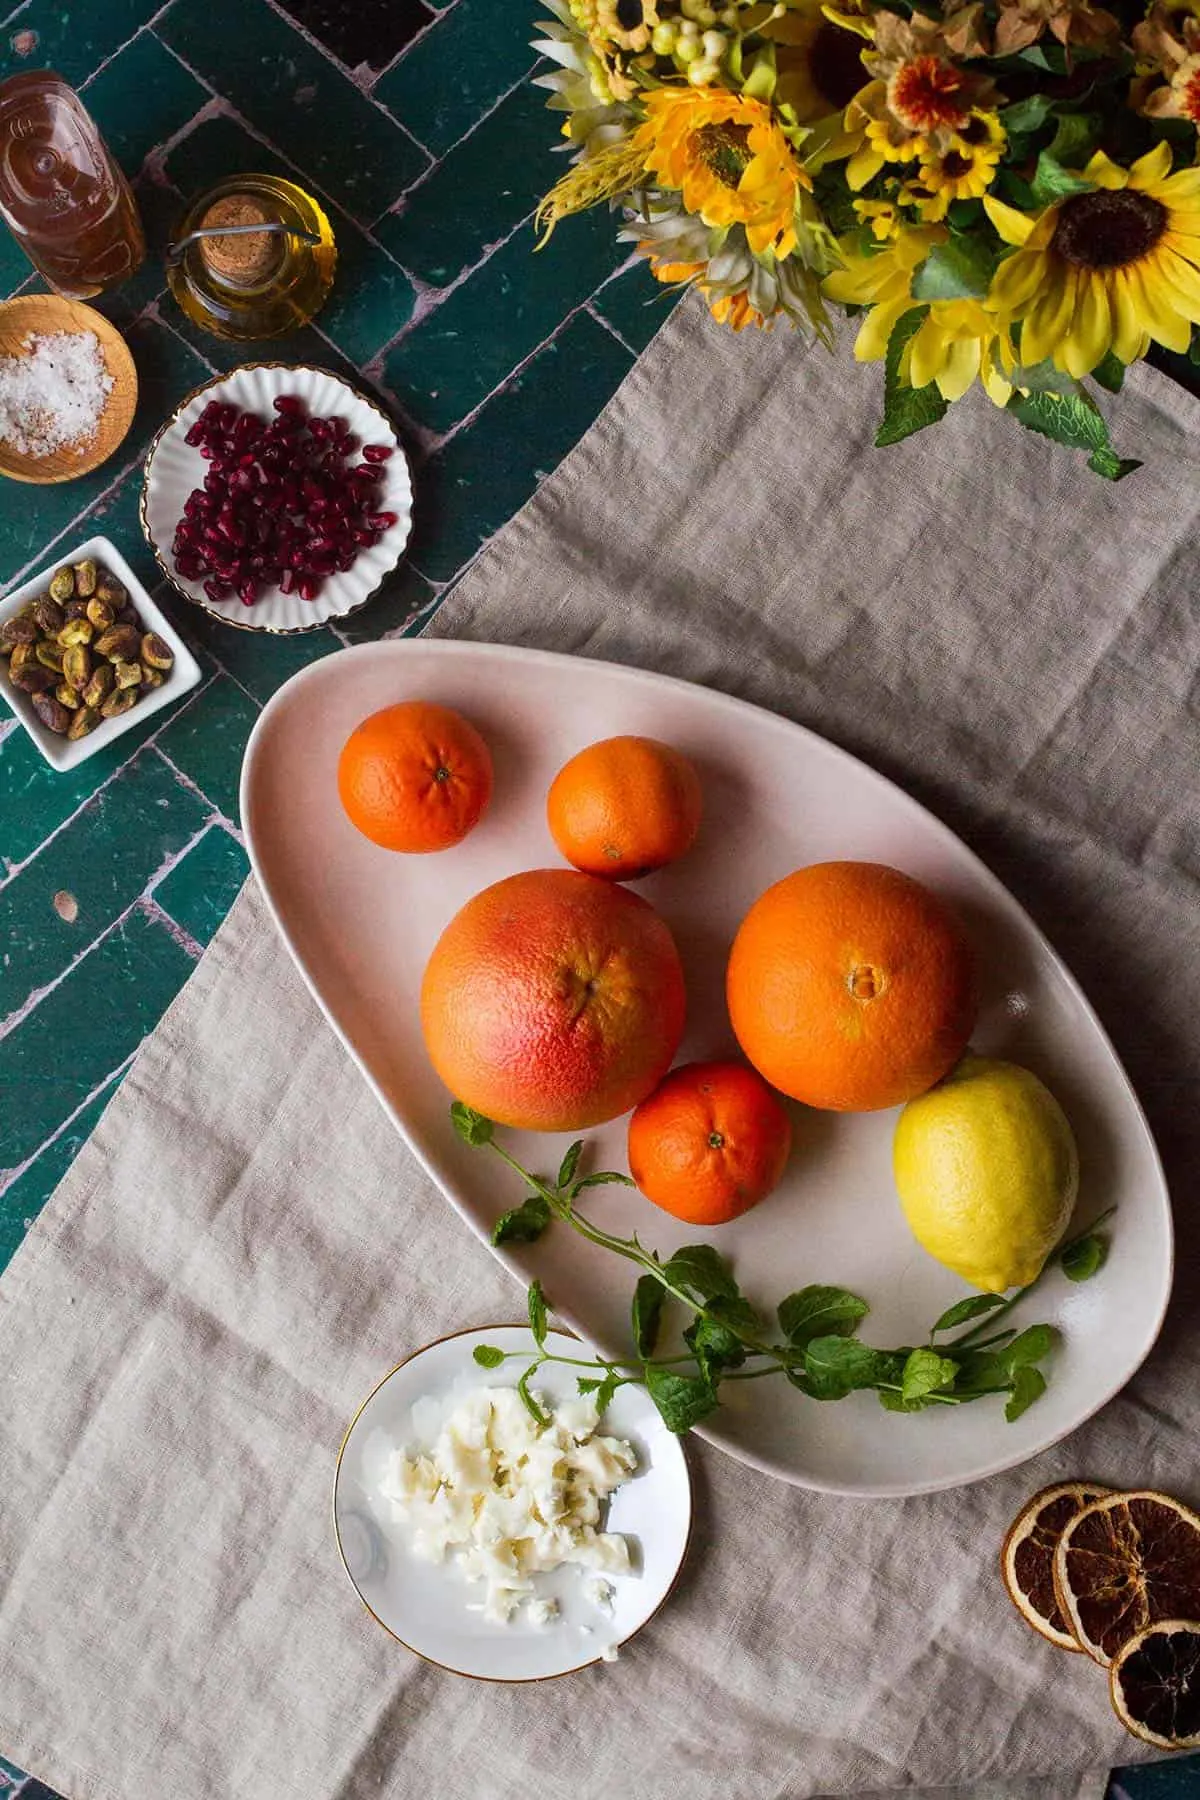 Whole citrus fruits on a rustic plate.